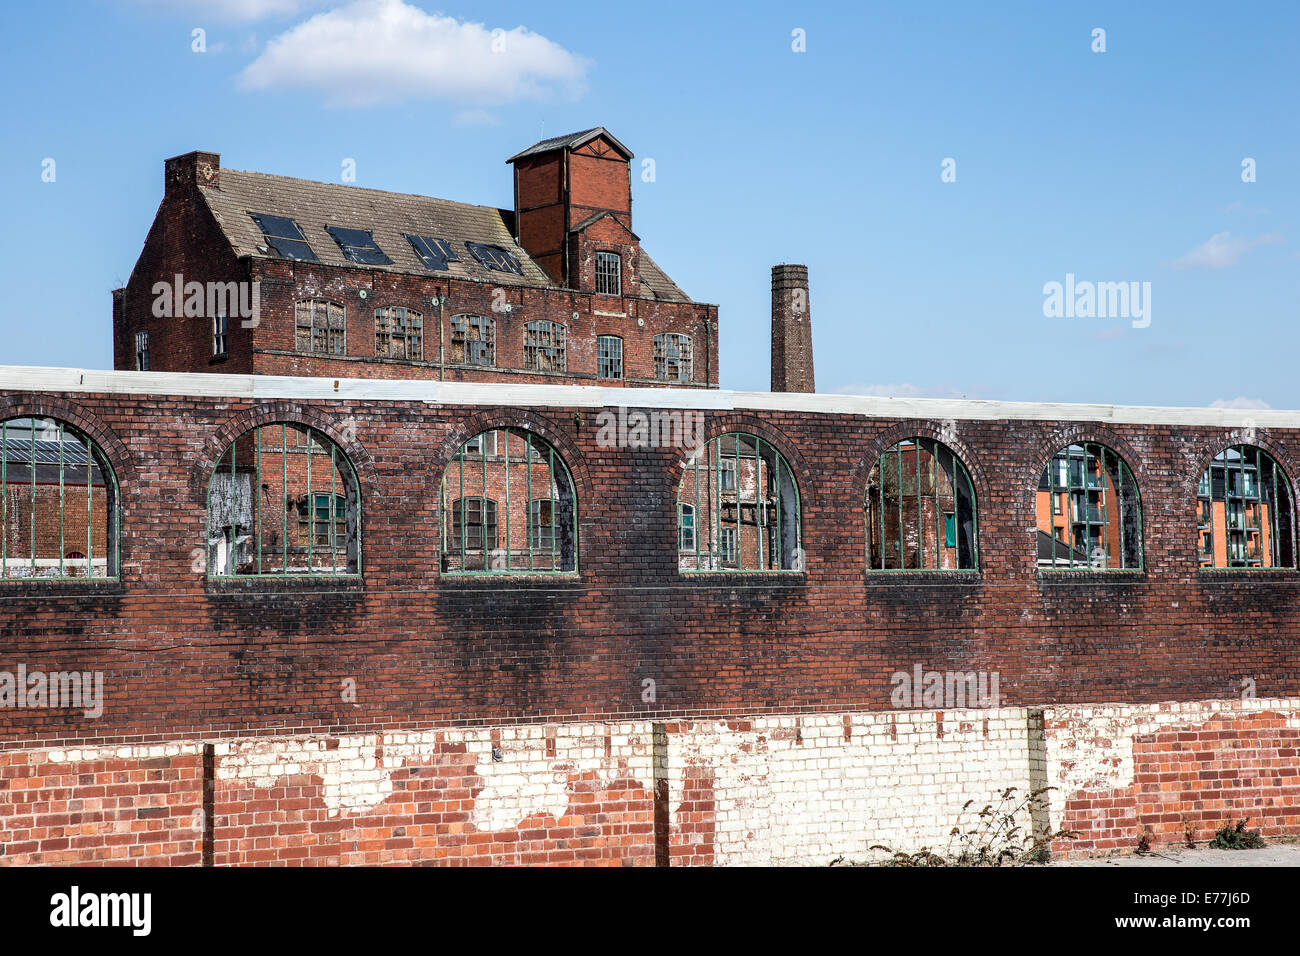 Construction and building work at Eagle Works at Little Kelham sustainable property development in Kelham Island Sheffield. Stock Photo